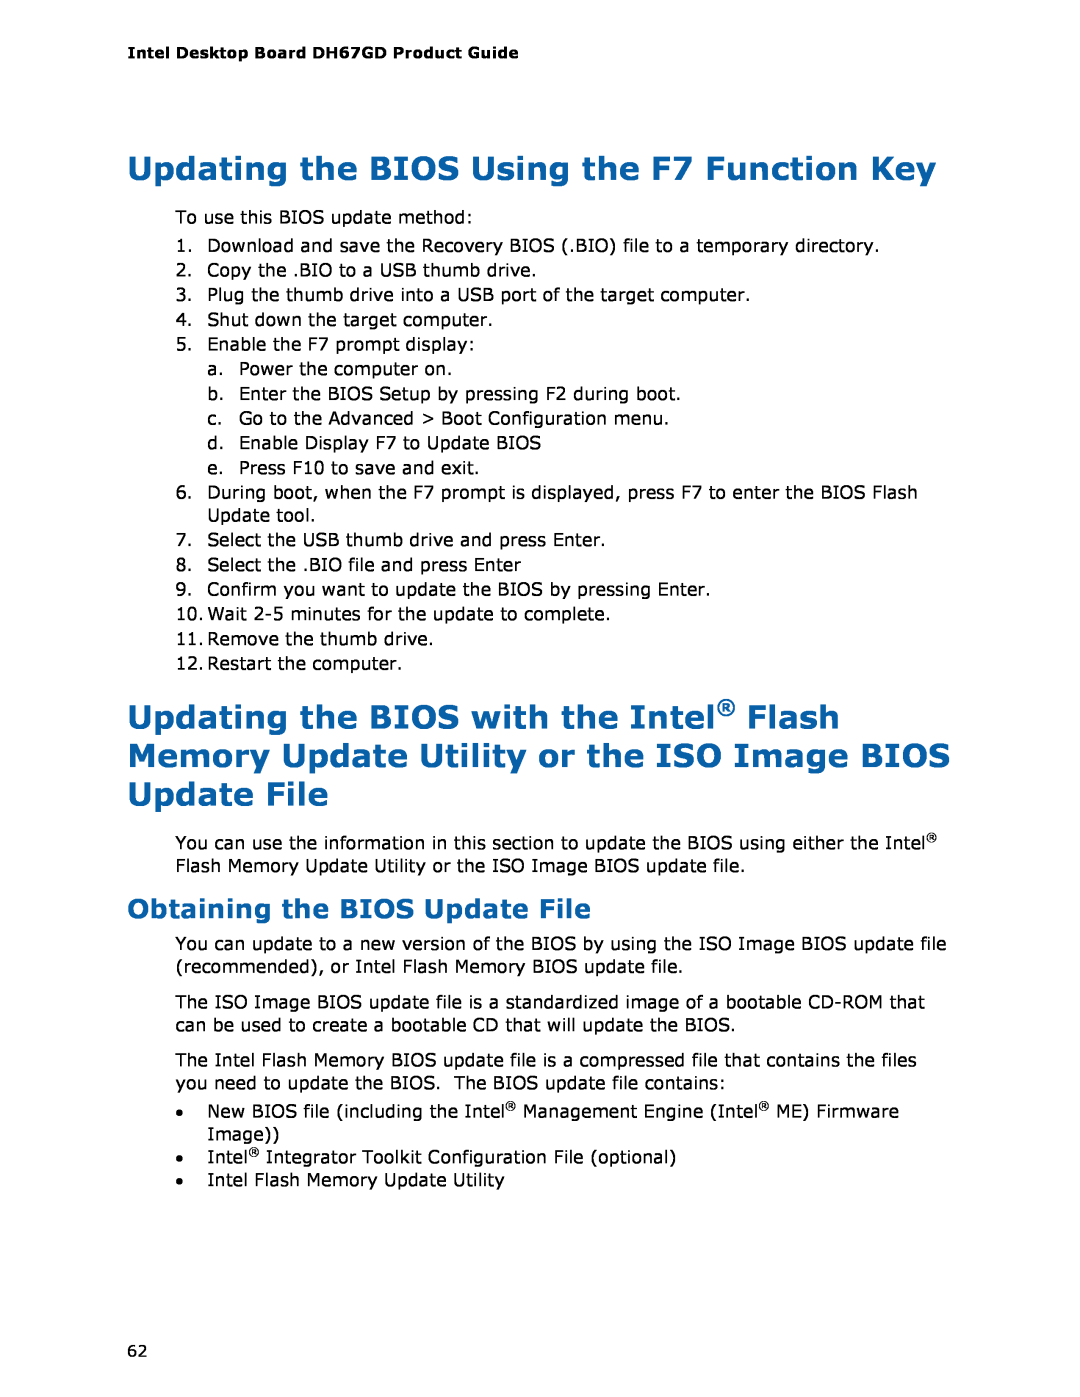 Intel G13841-001, BLKDH67GDB3 manual Updating the BIOS Using the F7 Function Key, Obtaining the BIOS Update File 